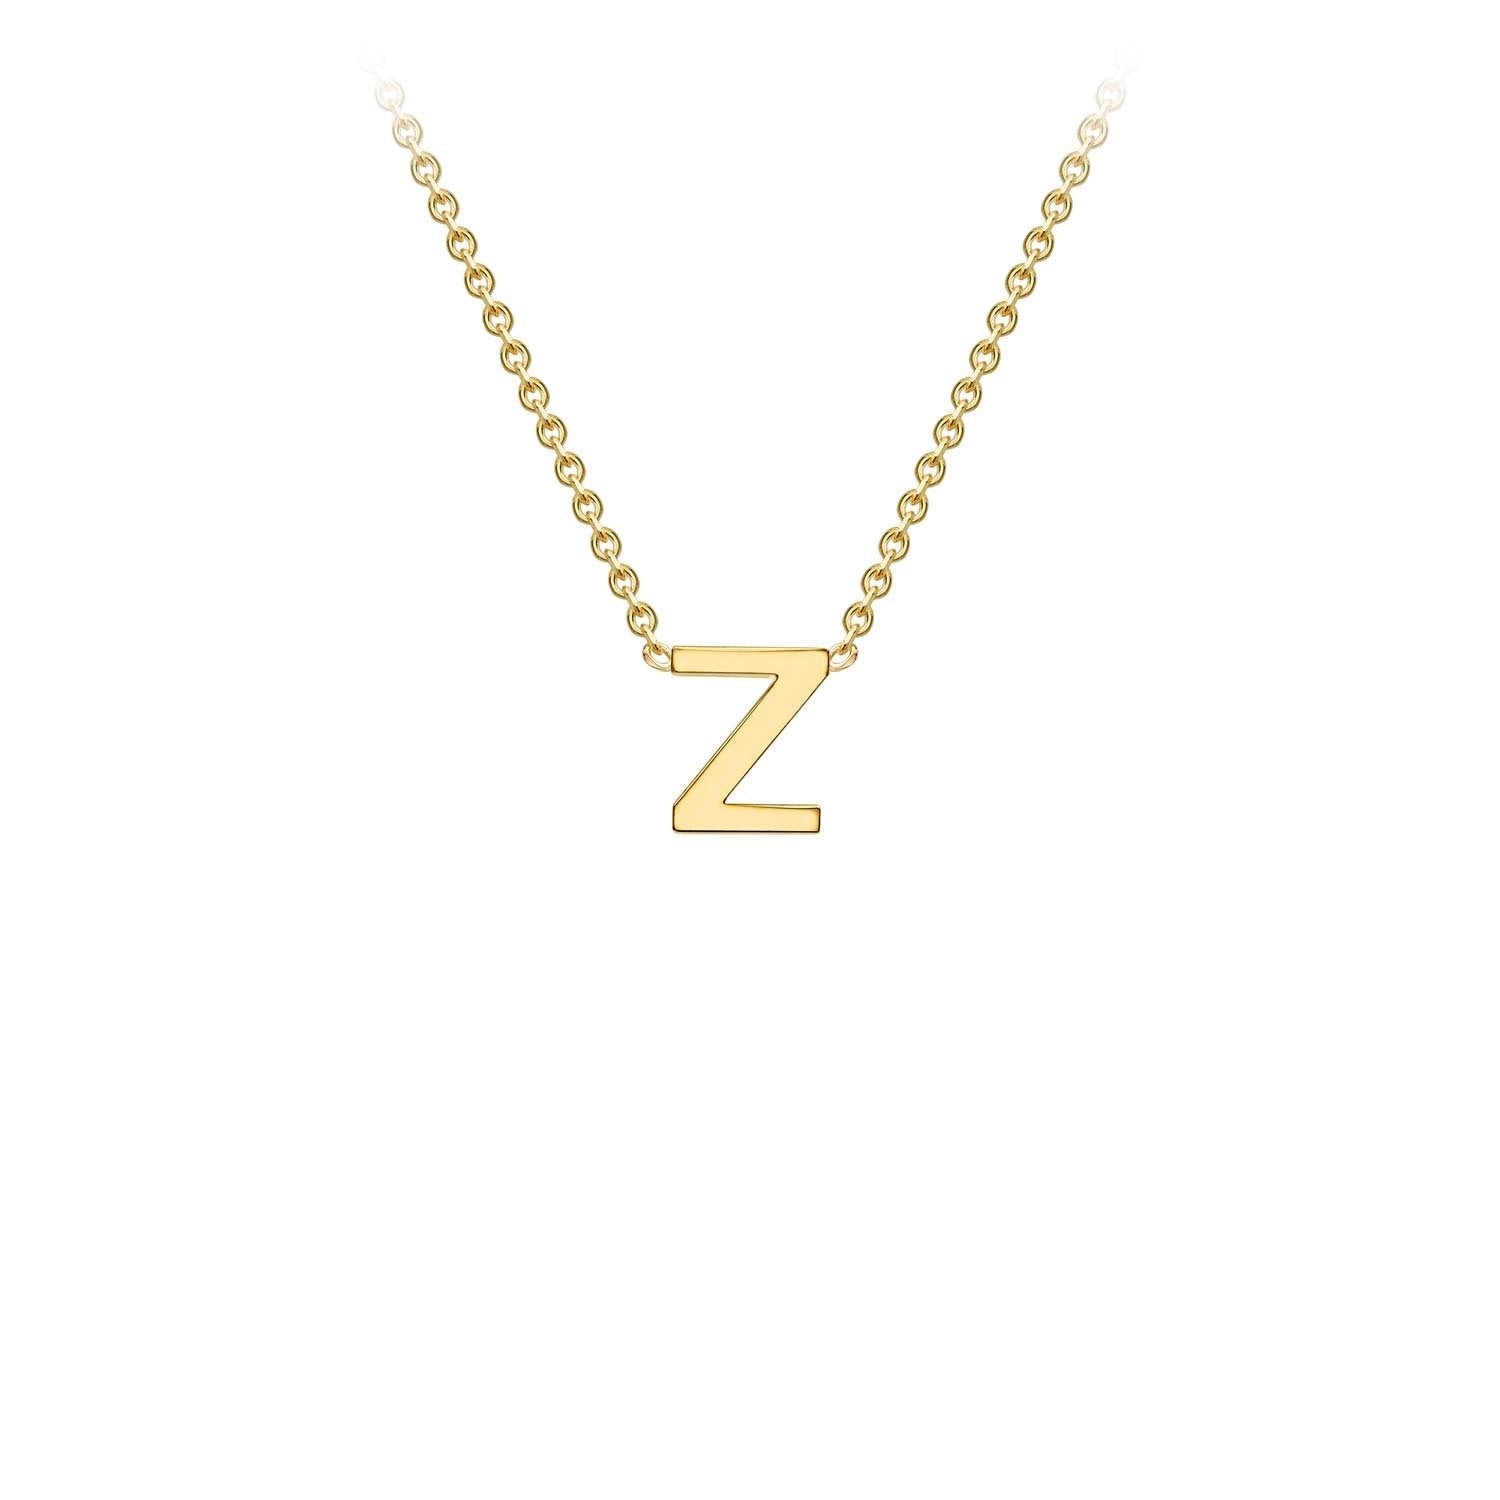 9ct Yellow Gold 'Z' Petite Initial Adjustable Letter Necklace 38/43cm